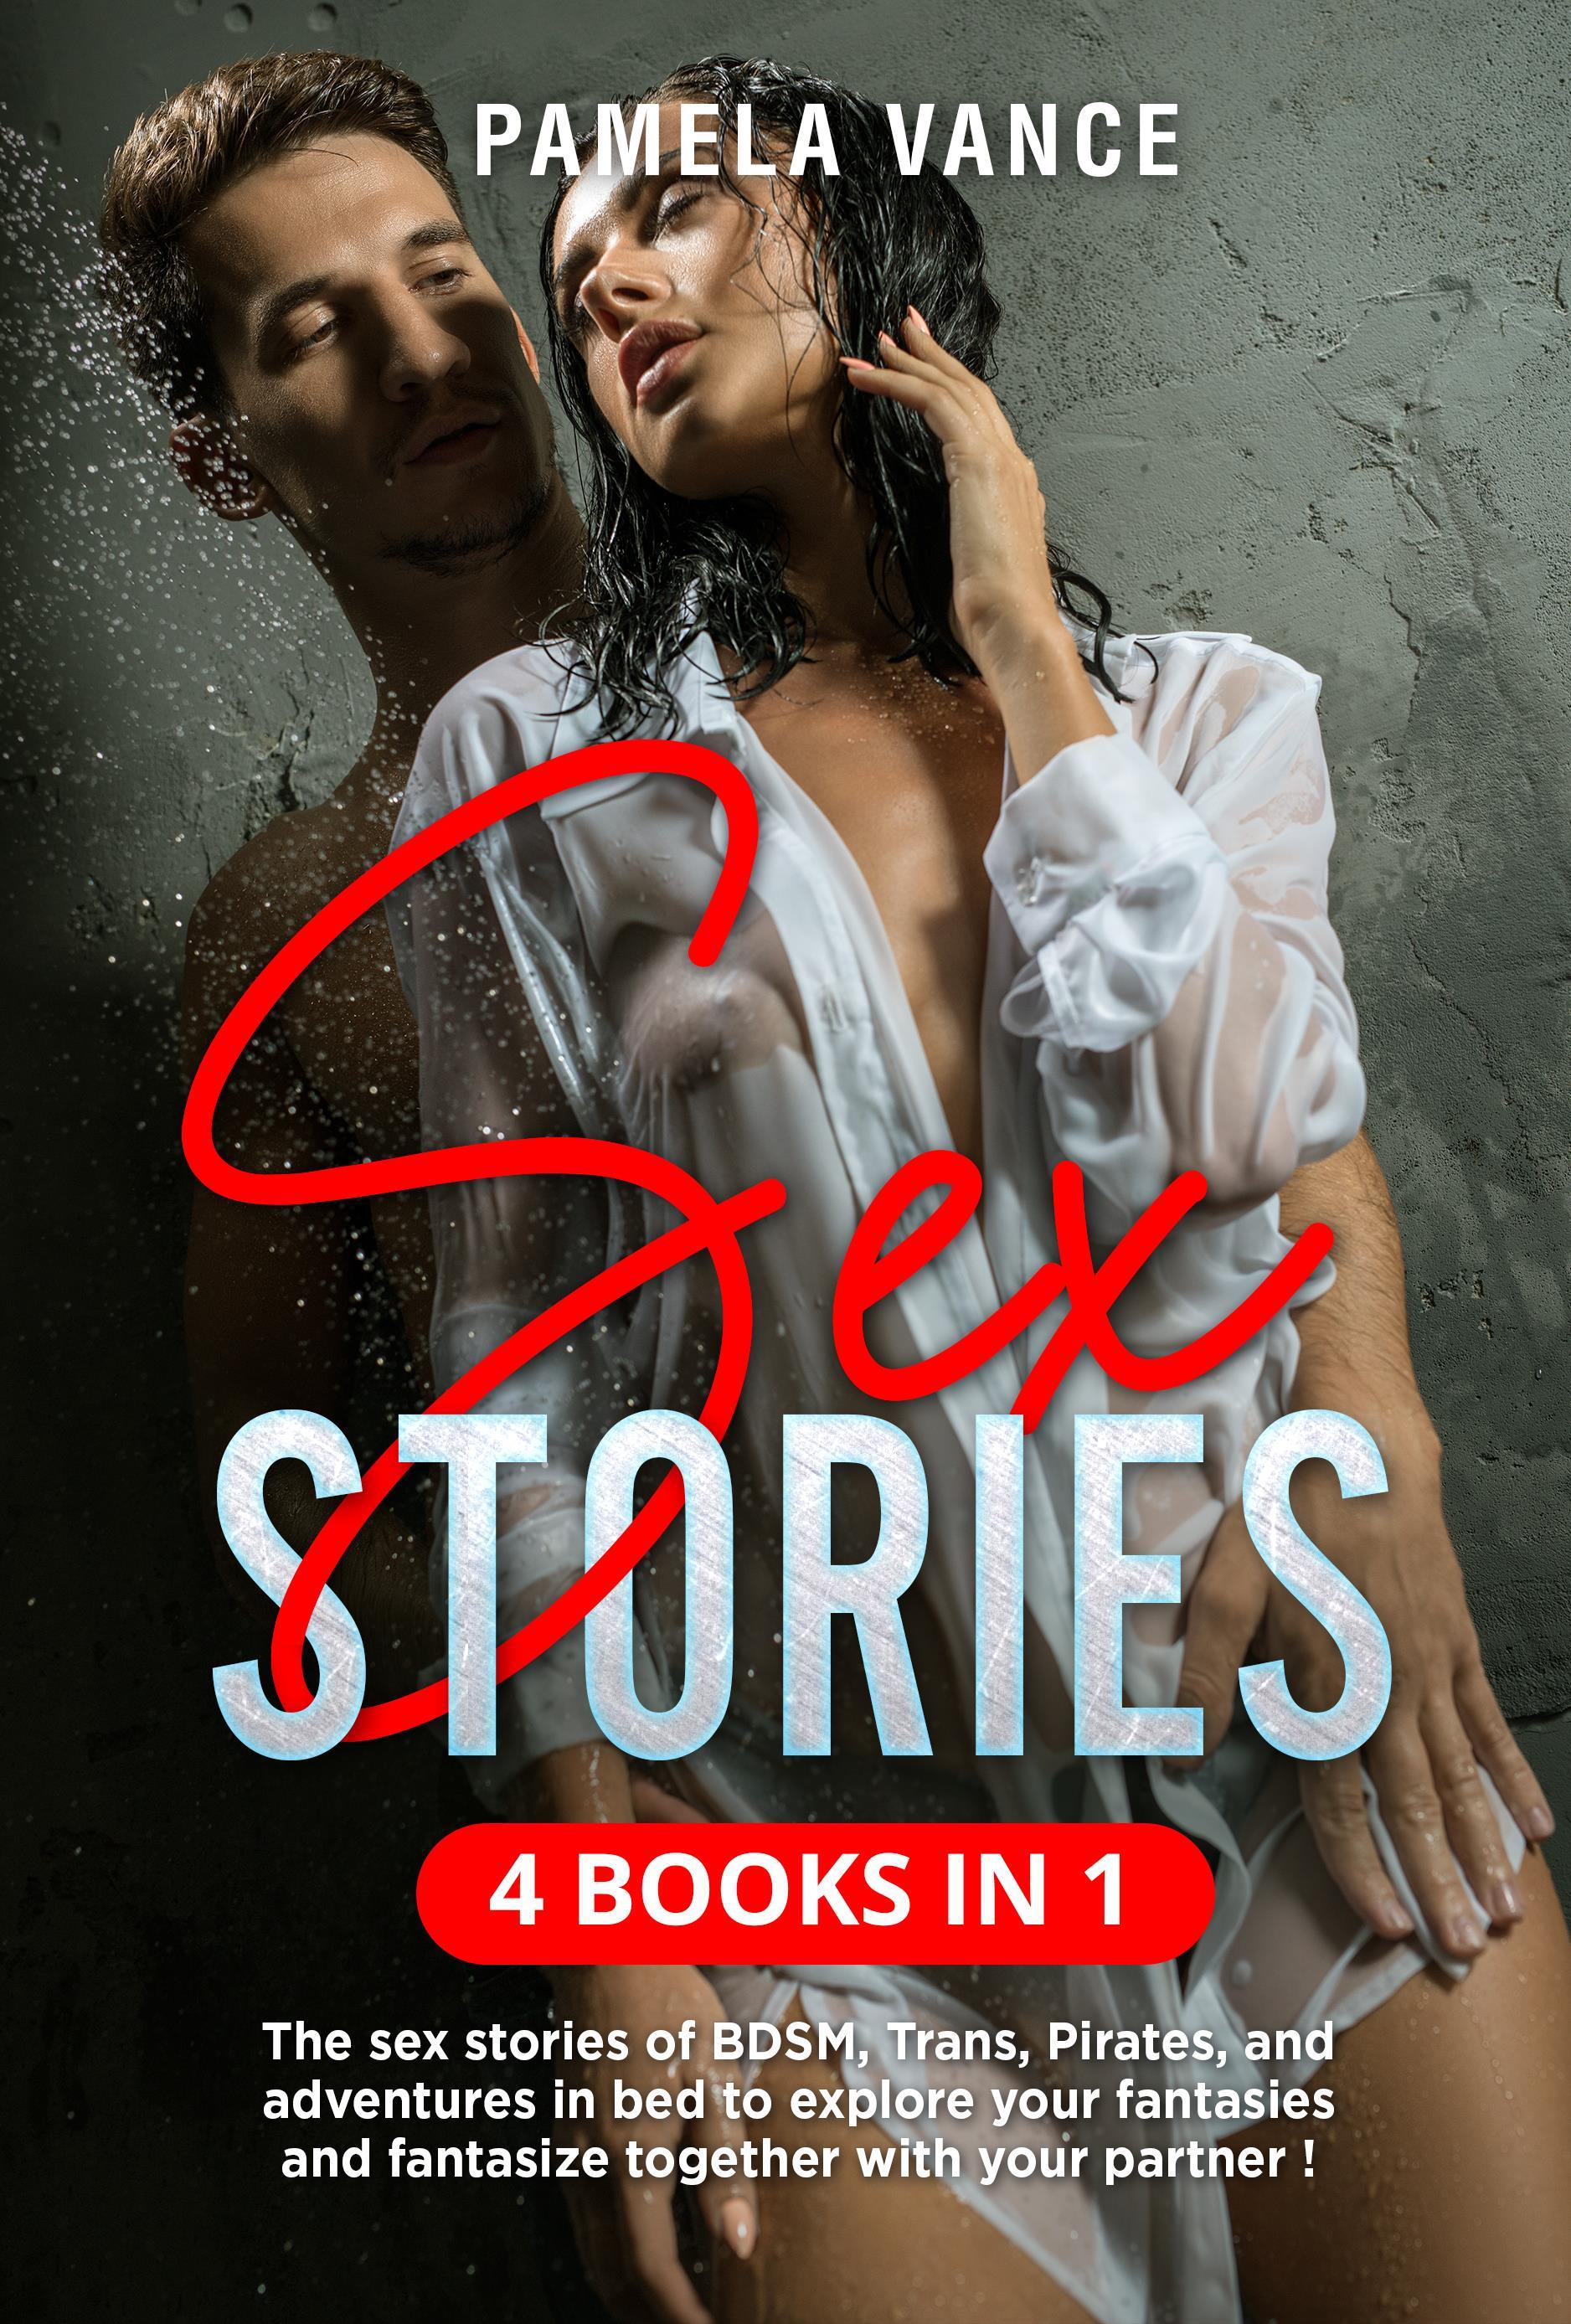 Sex Stories (4 Books in 1). The sex stories of BDSM, Trans, Pirates, and adventures in bed to explore your fantasies and fantasize together with your partner !